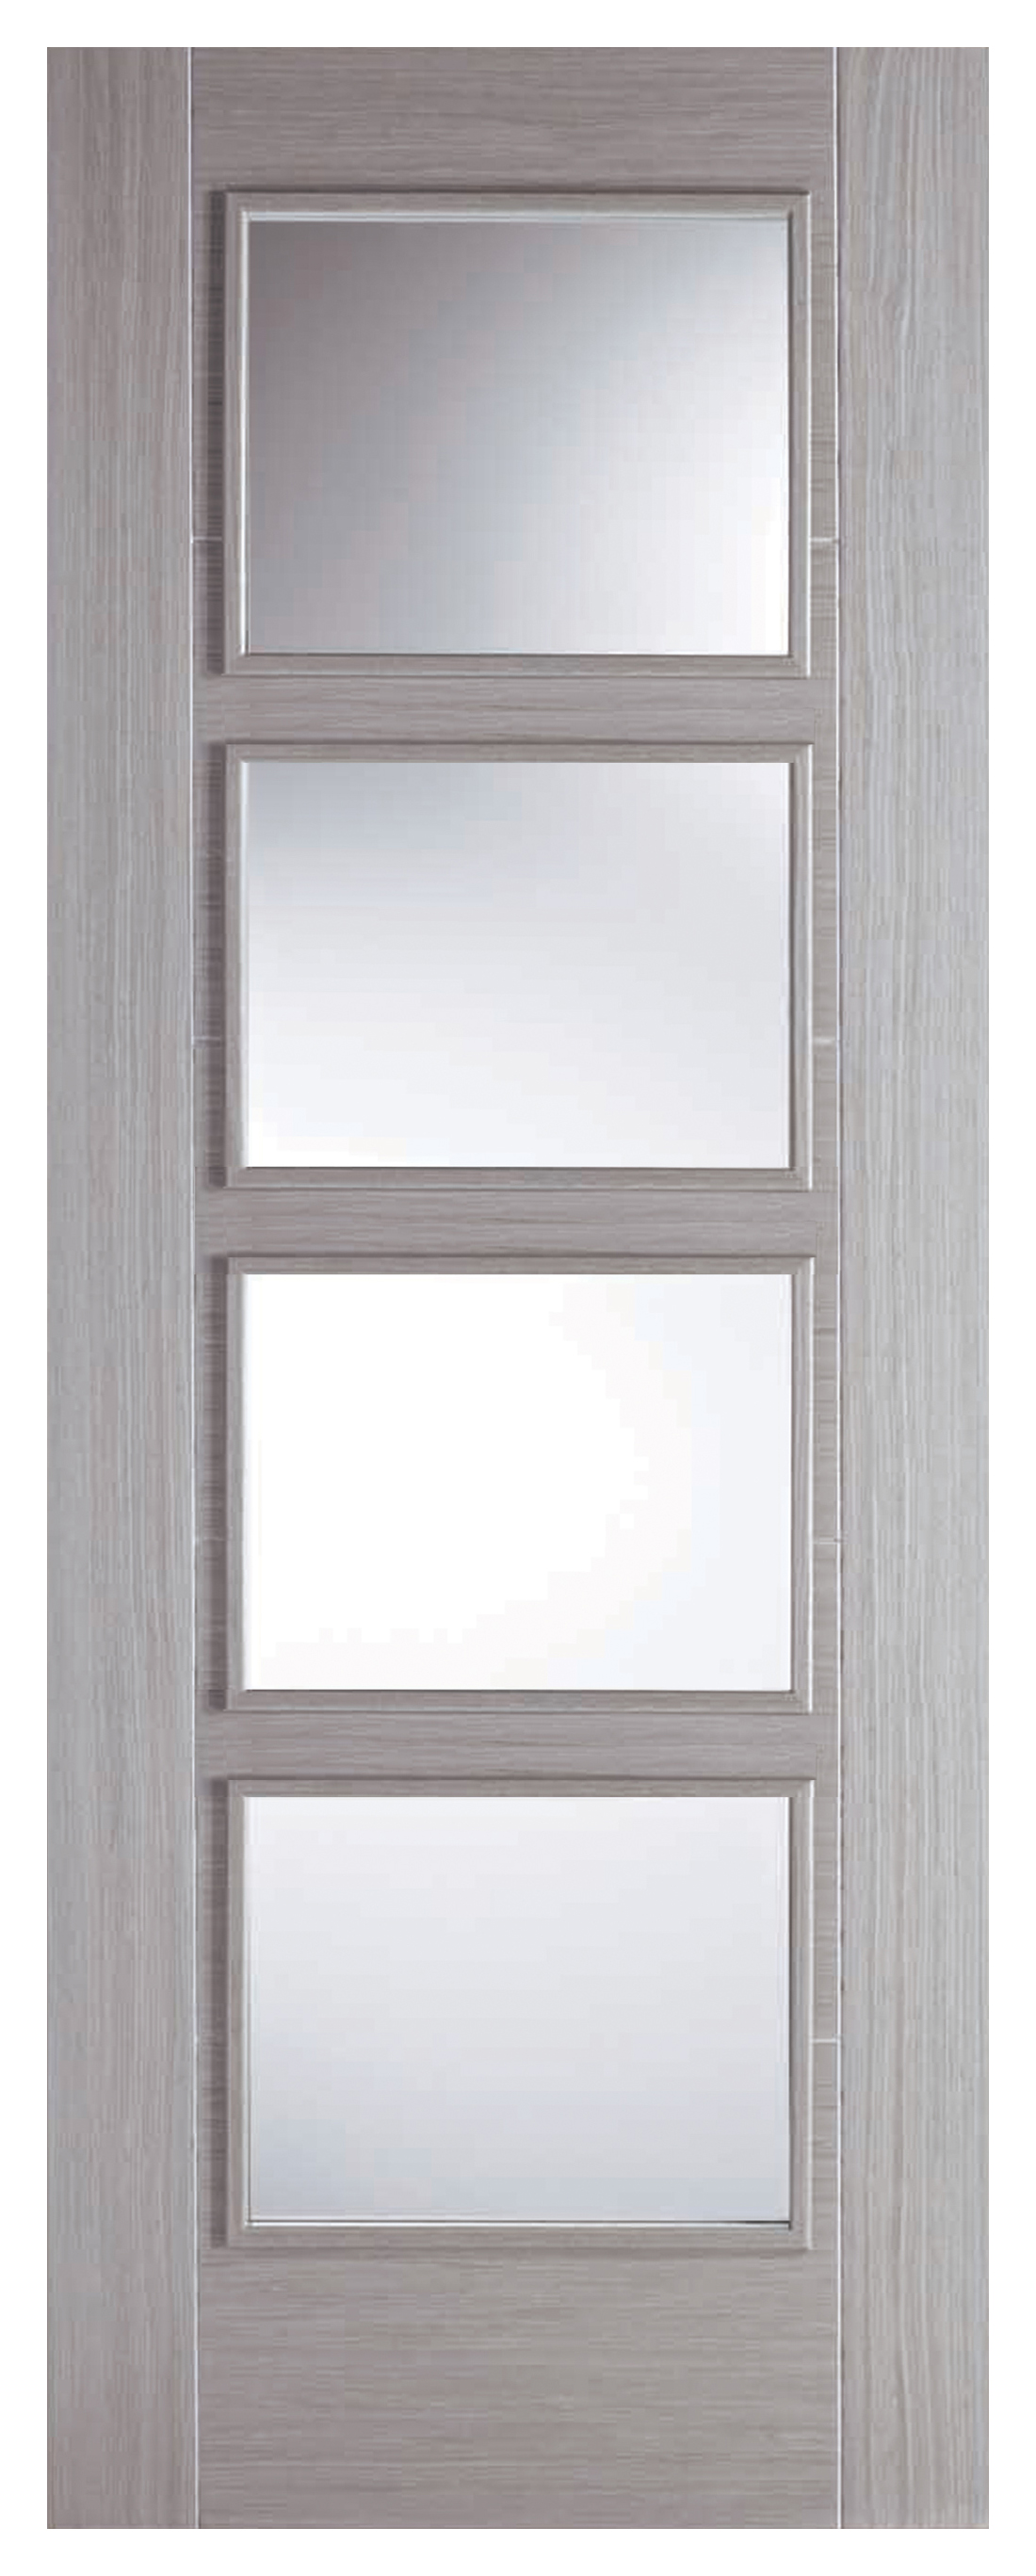 Image of LPD Internal Vancouver 4 Lite Pre-Finished Light Grey FD30 Fire Door - 686 x 1981mm